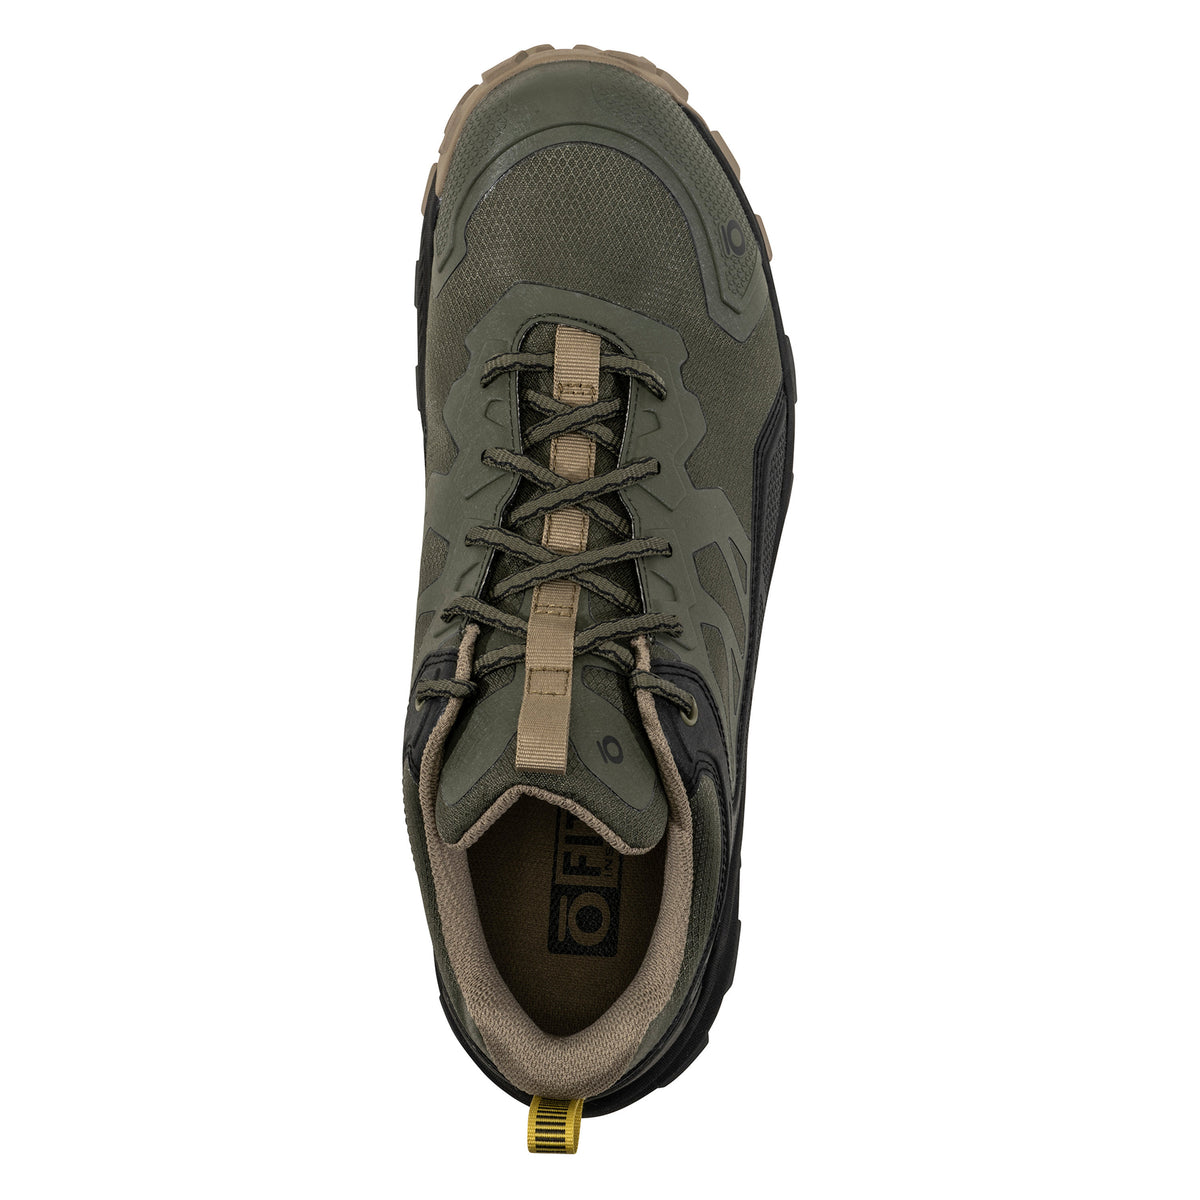 Top-down view of a single olive green OBOZ KATABATIC LOW B-DRY EVERGREEN - MENS hiking shoe with laces.